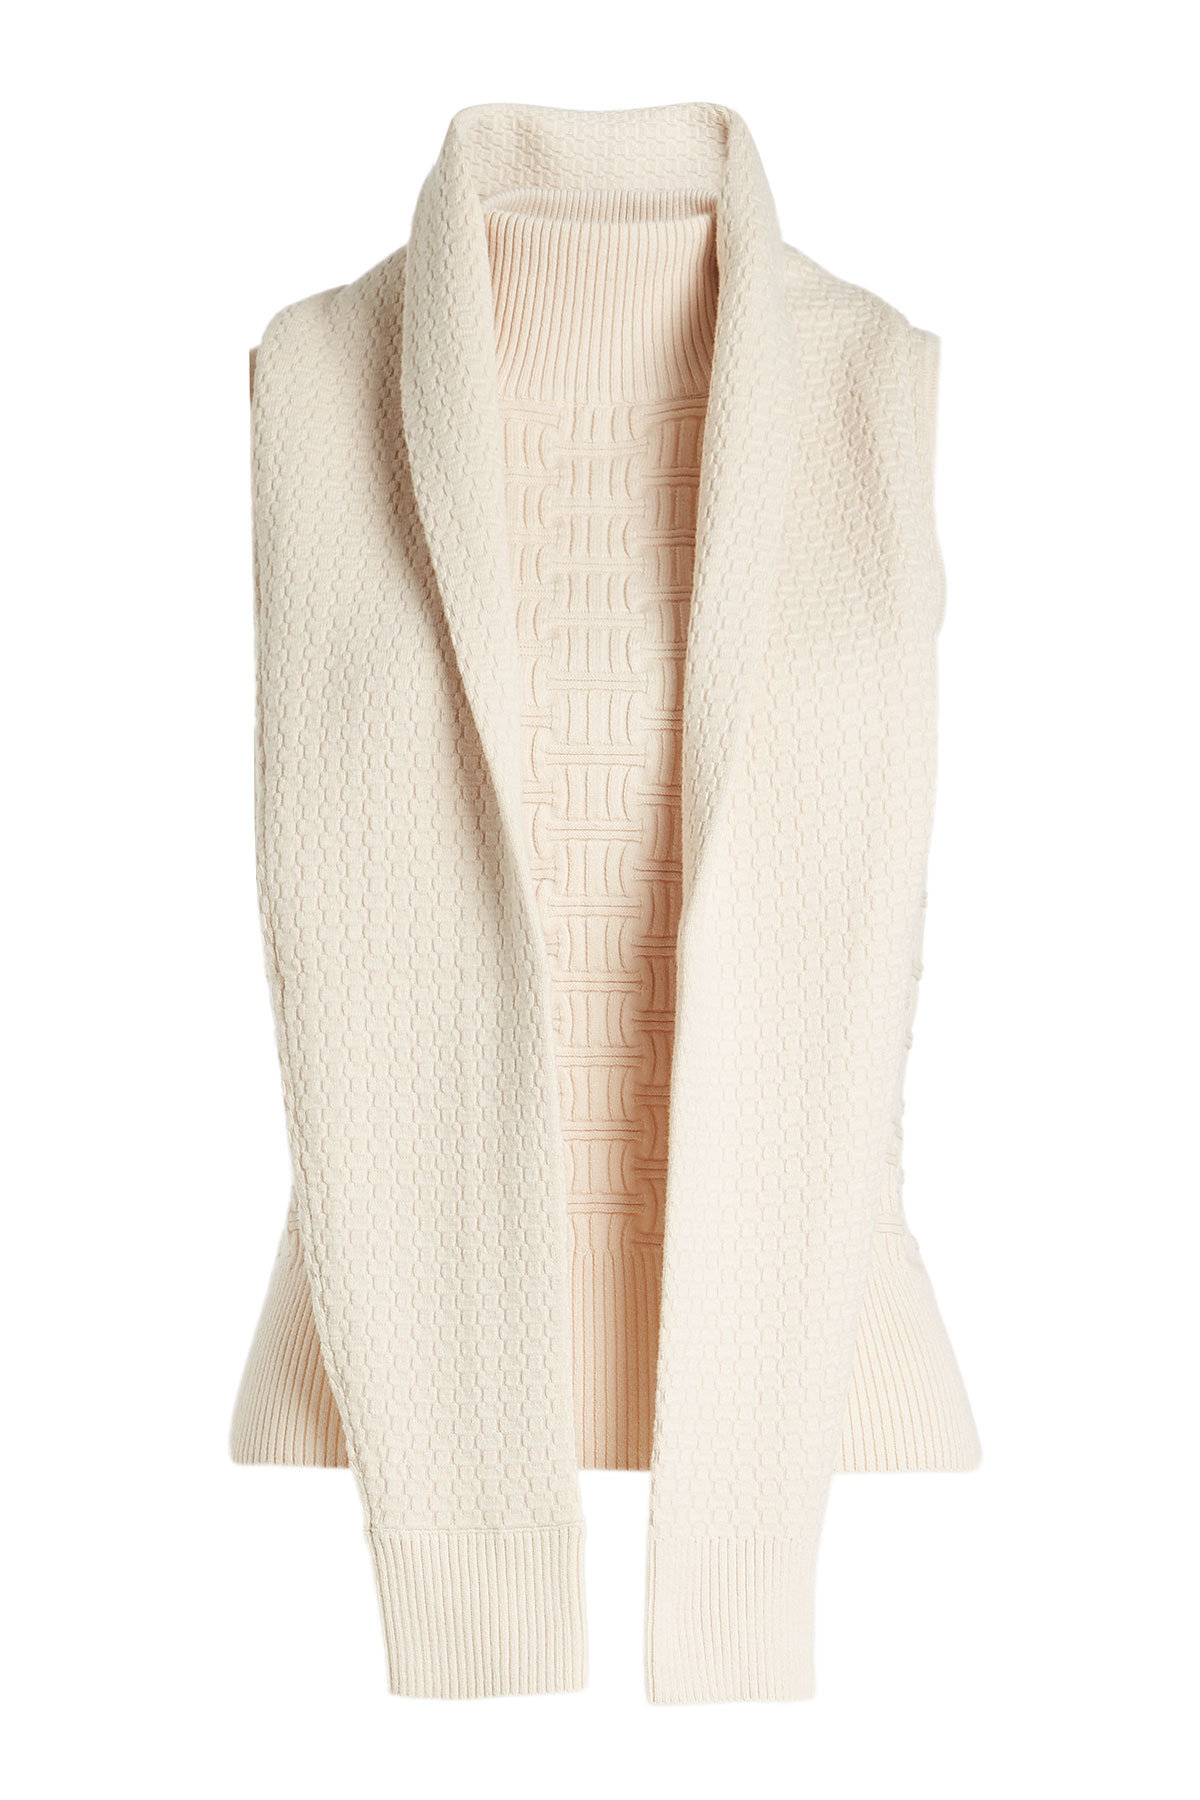 Carven - Turtleneck Knit in Cotton and Wool